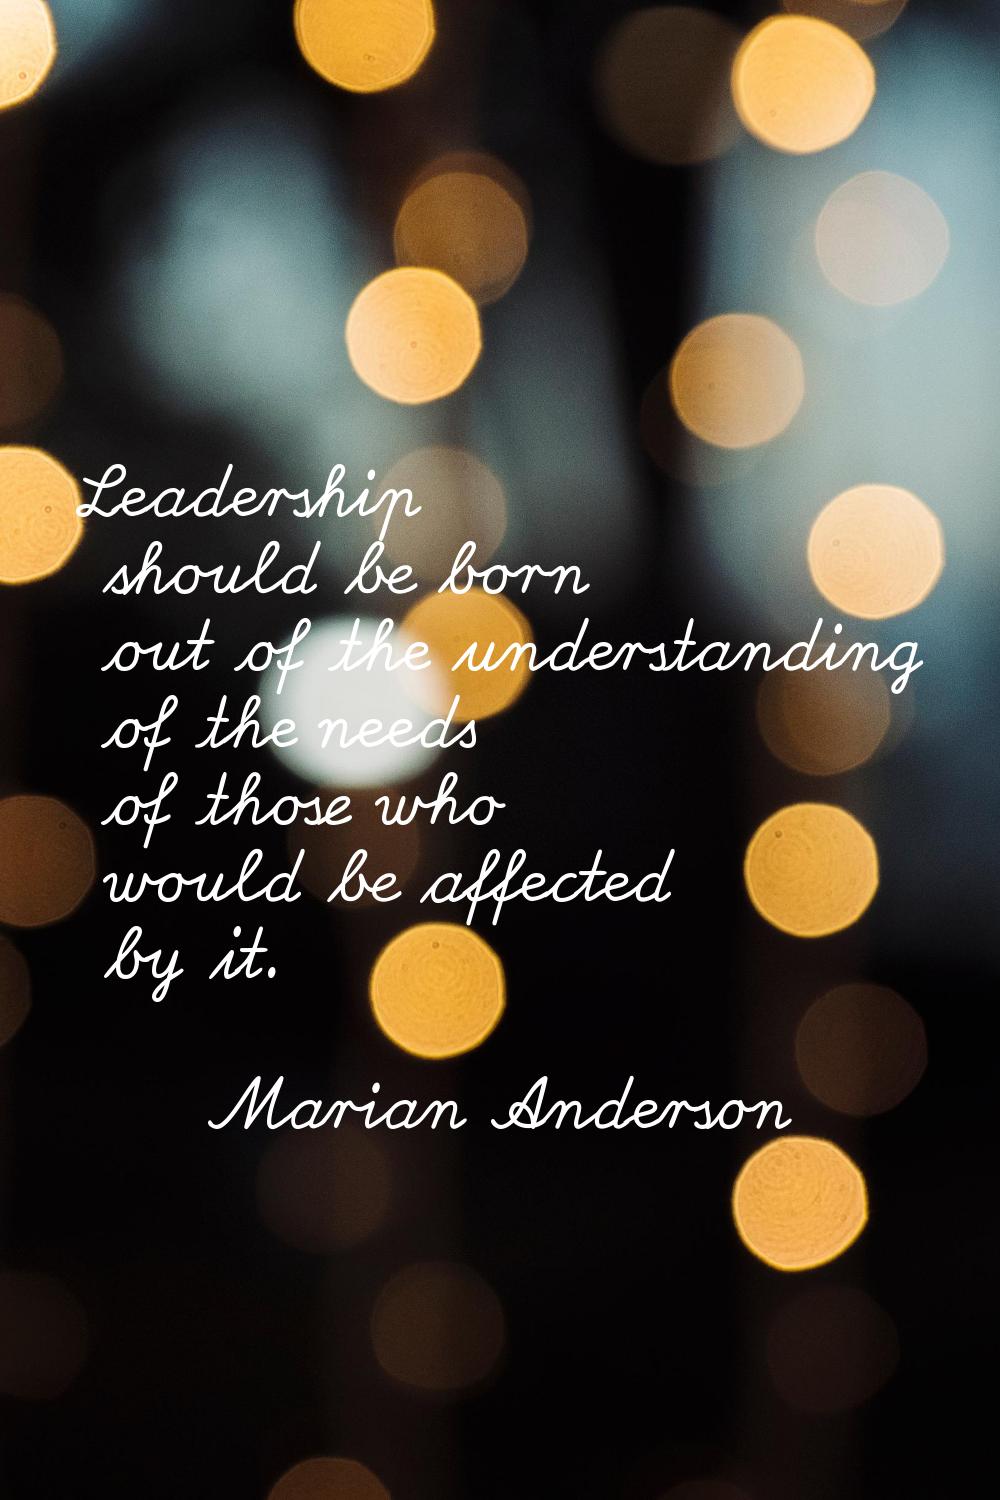 Leadership should be born out of the understanding of the needs of those who would be affected by i